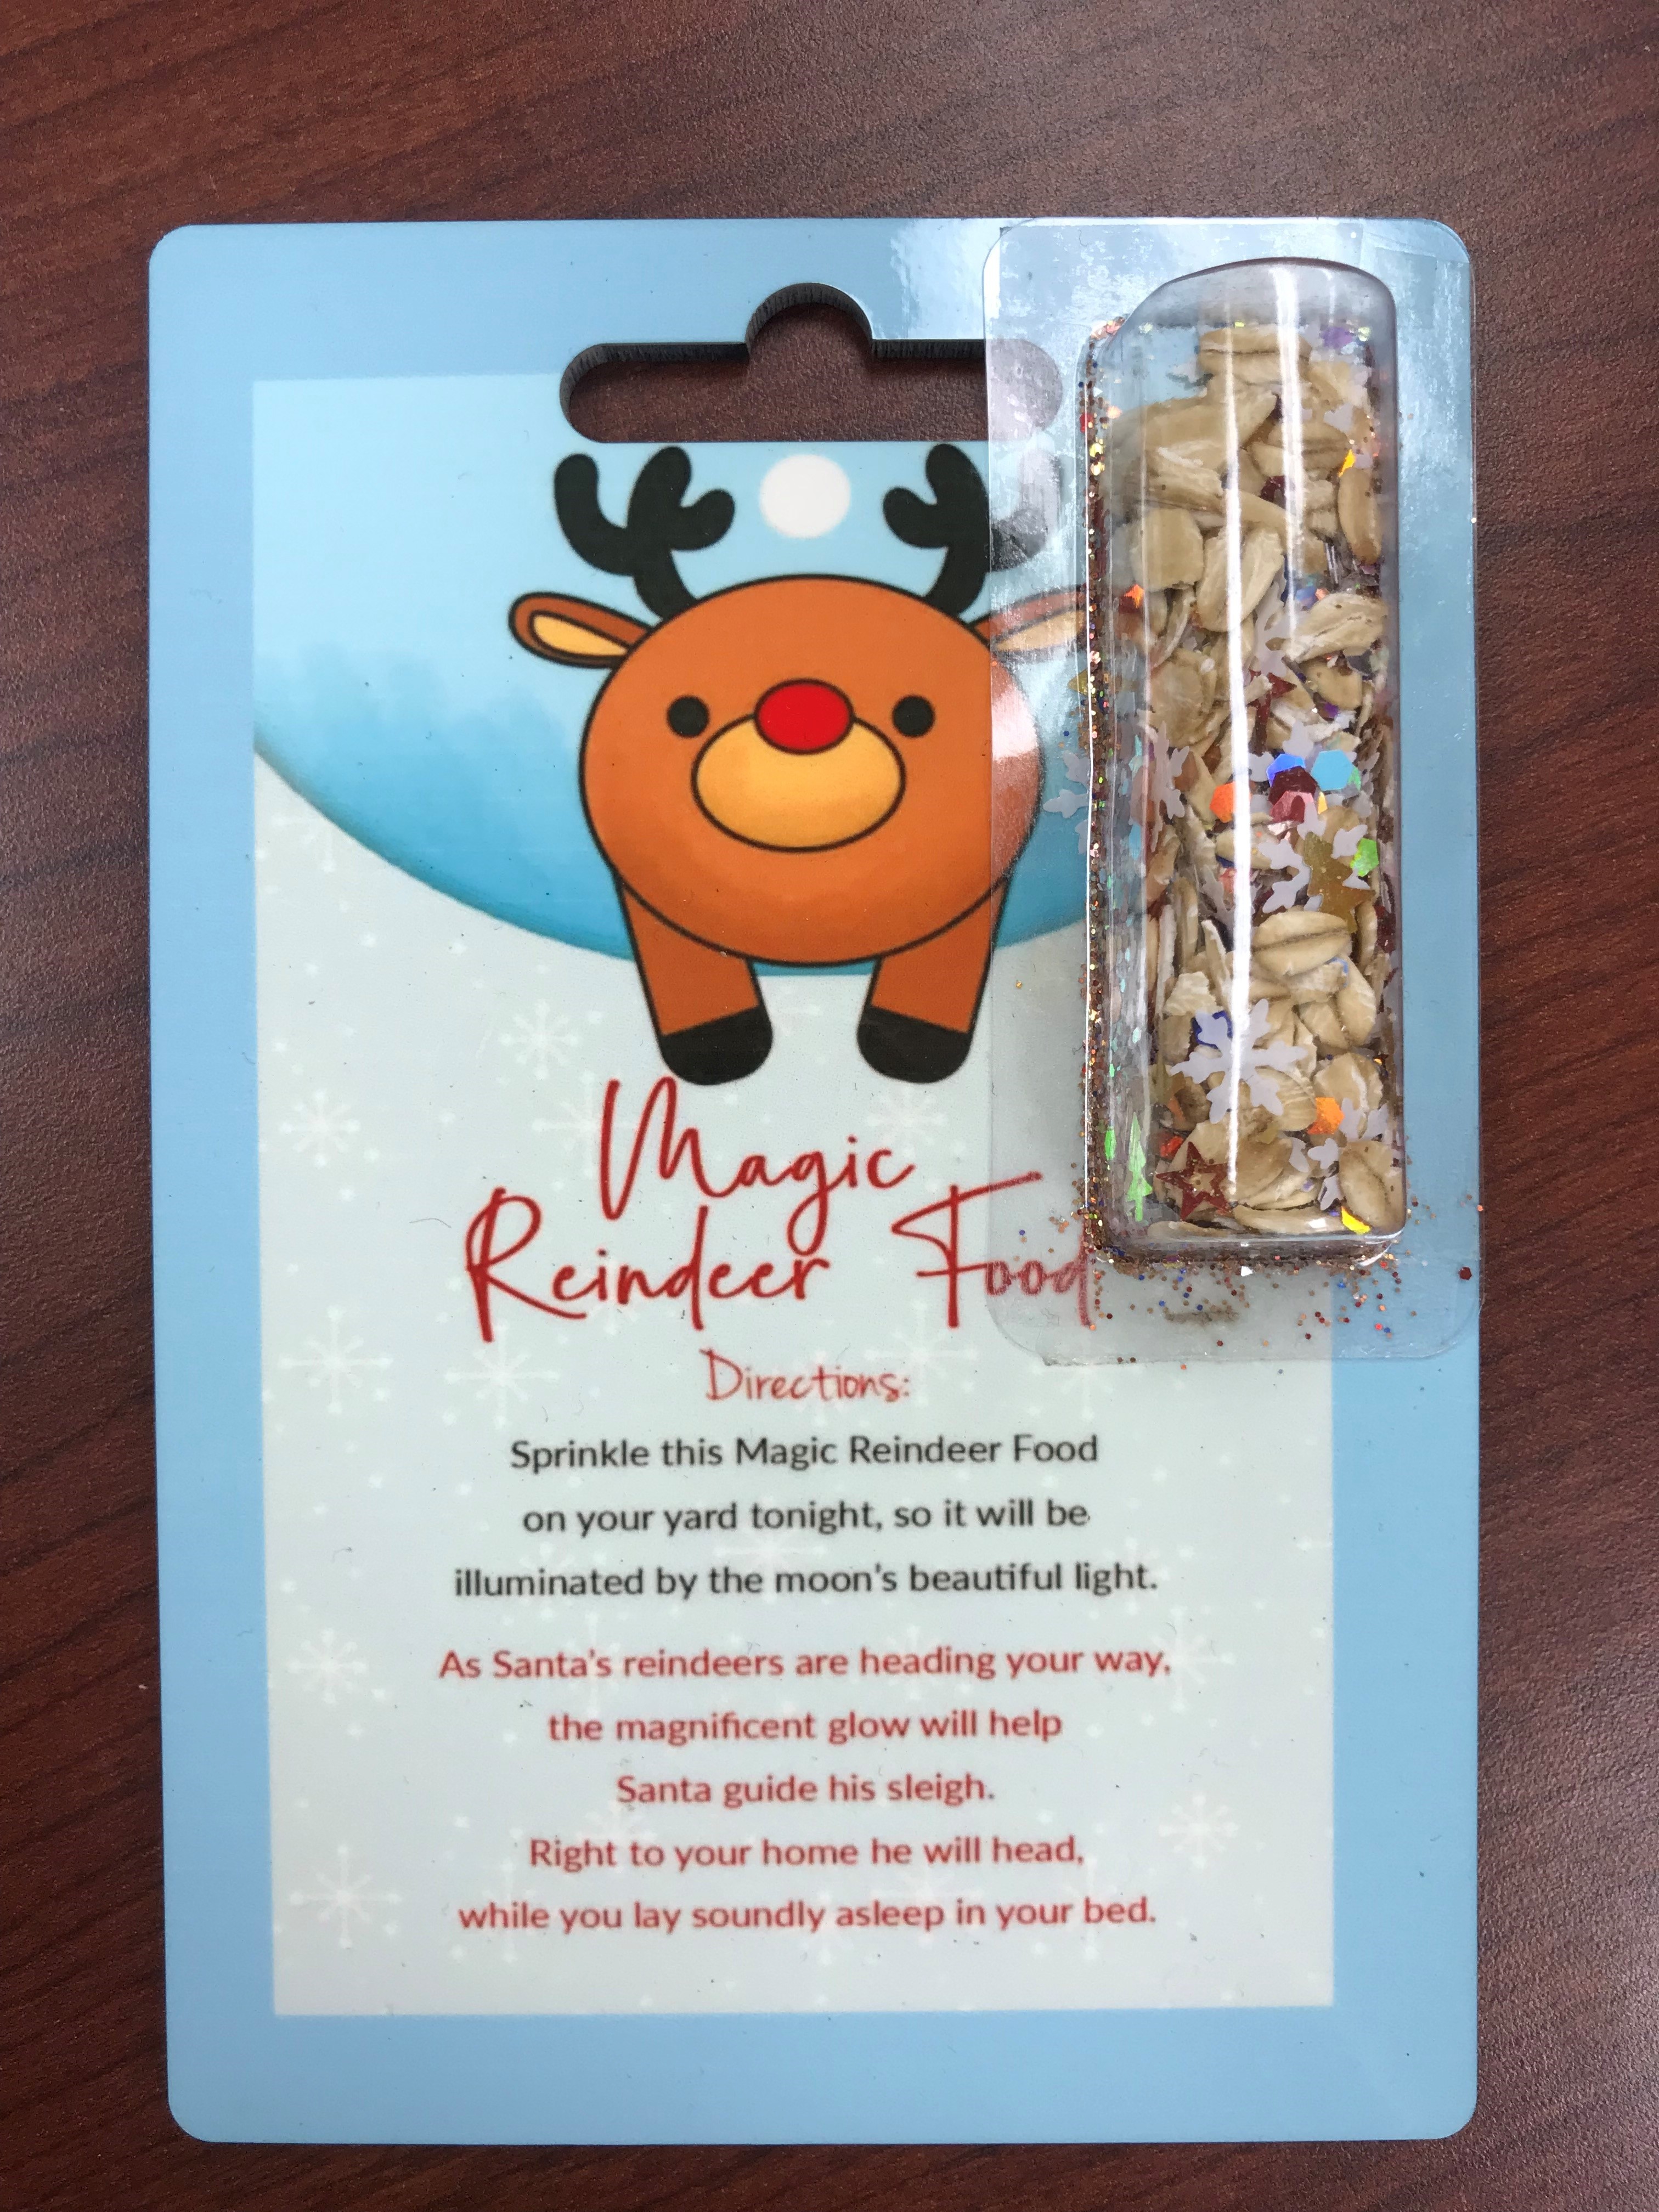 Reindeer Food made with sublimation printing